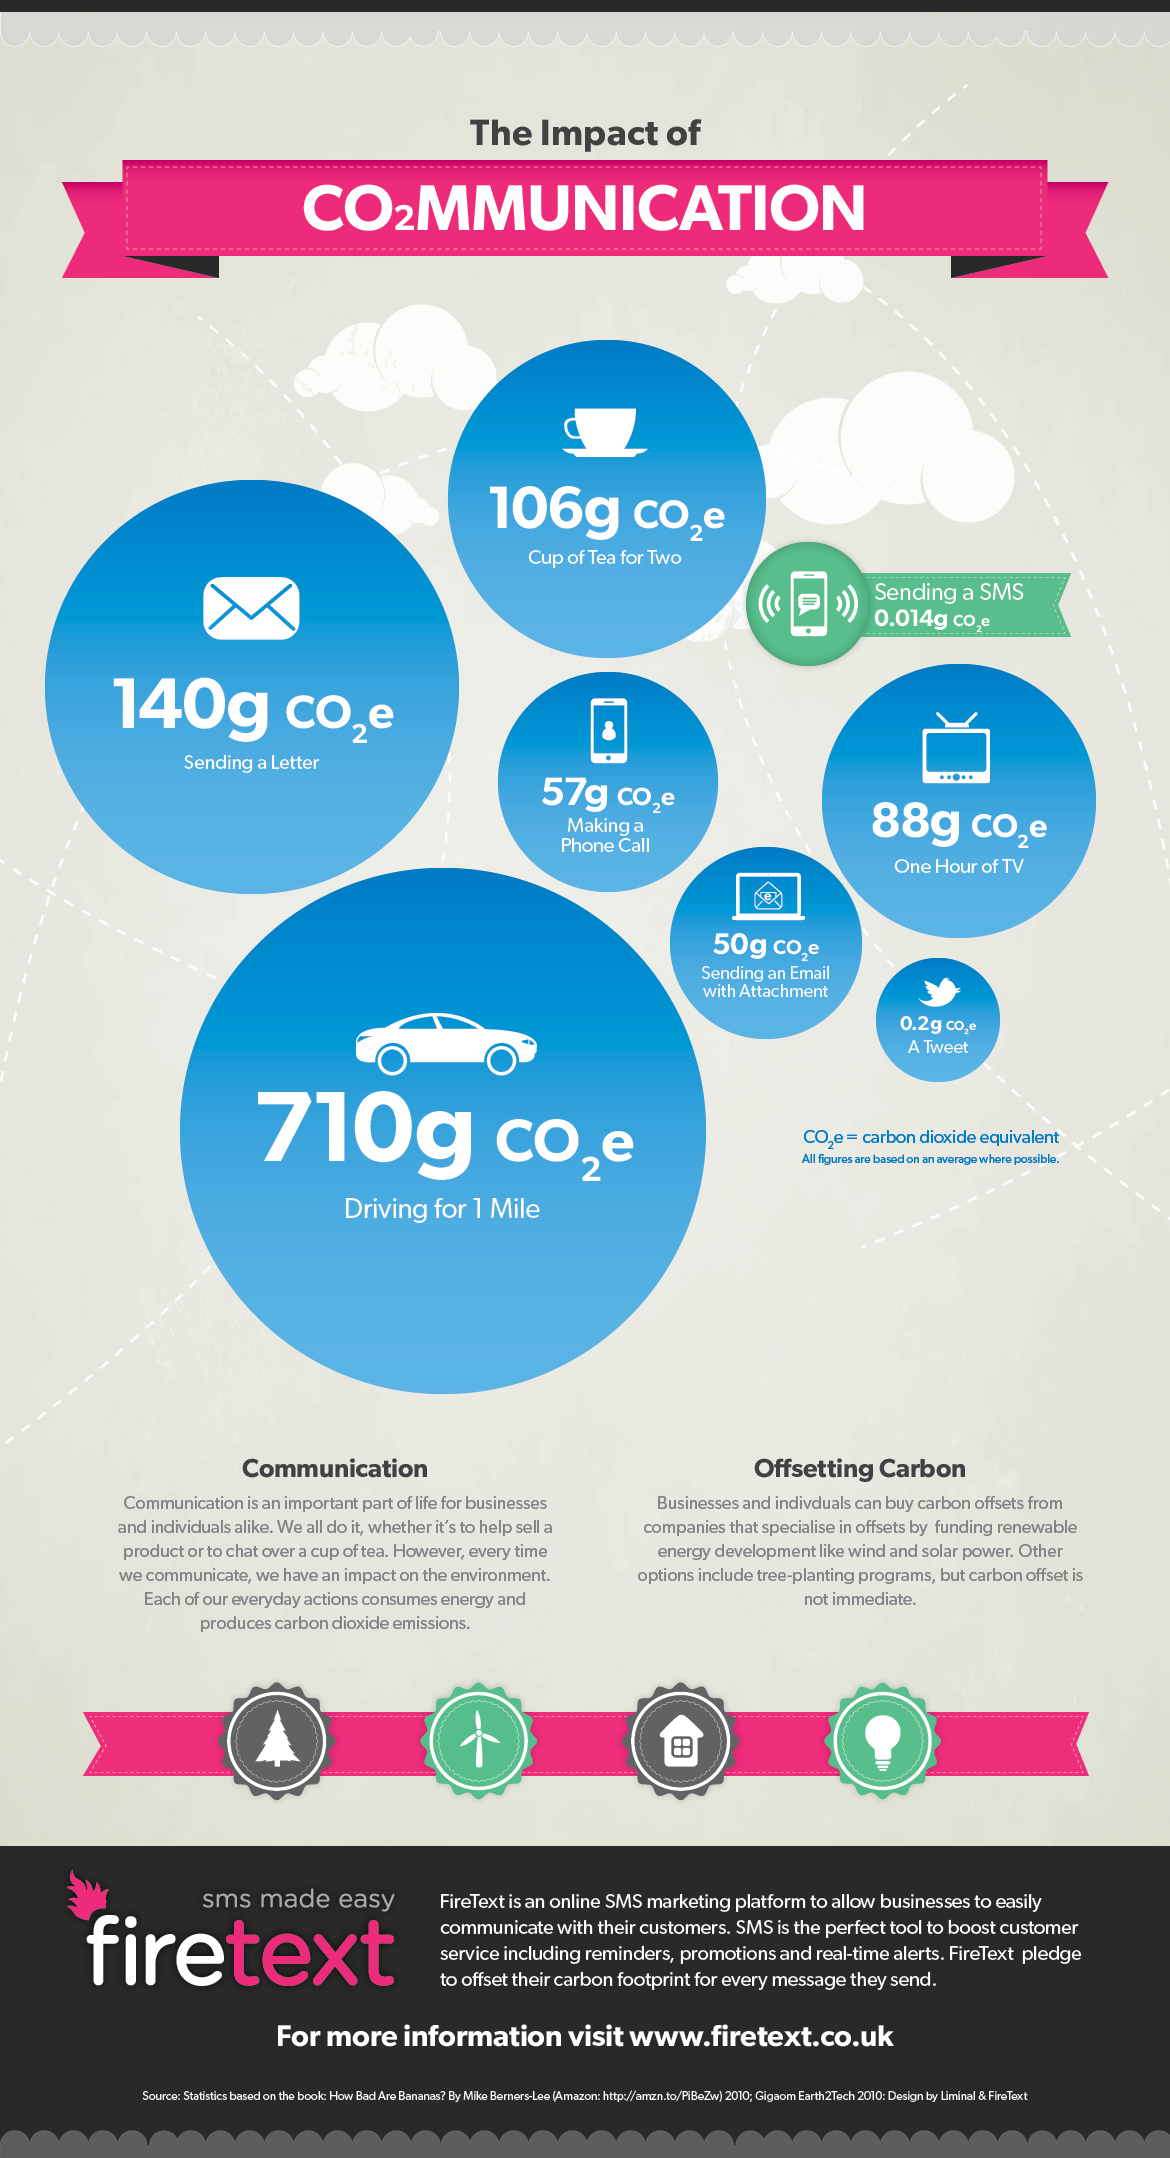 The carbon footprint of communication